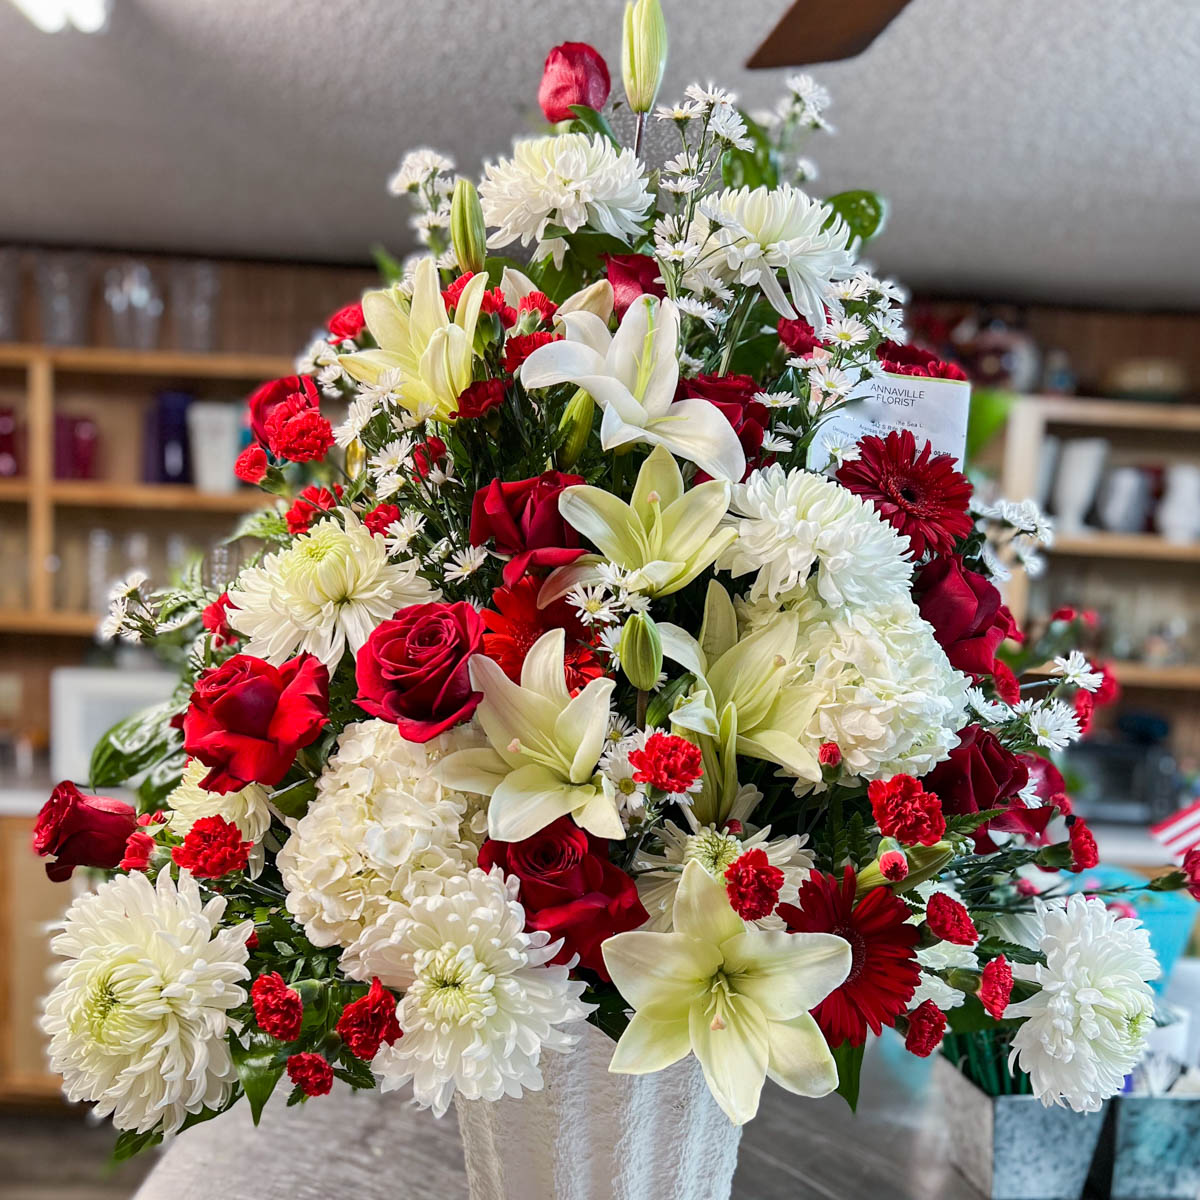 Red and White funeral basket by Annaville Florist